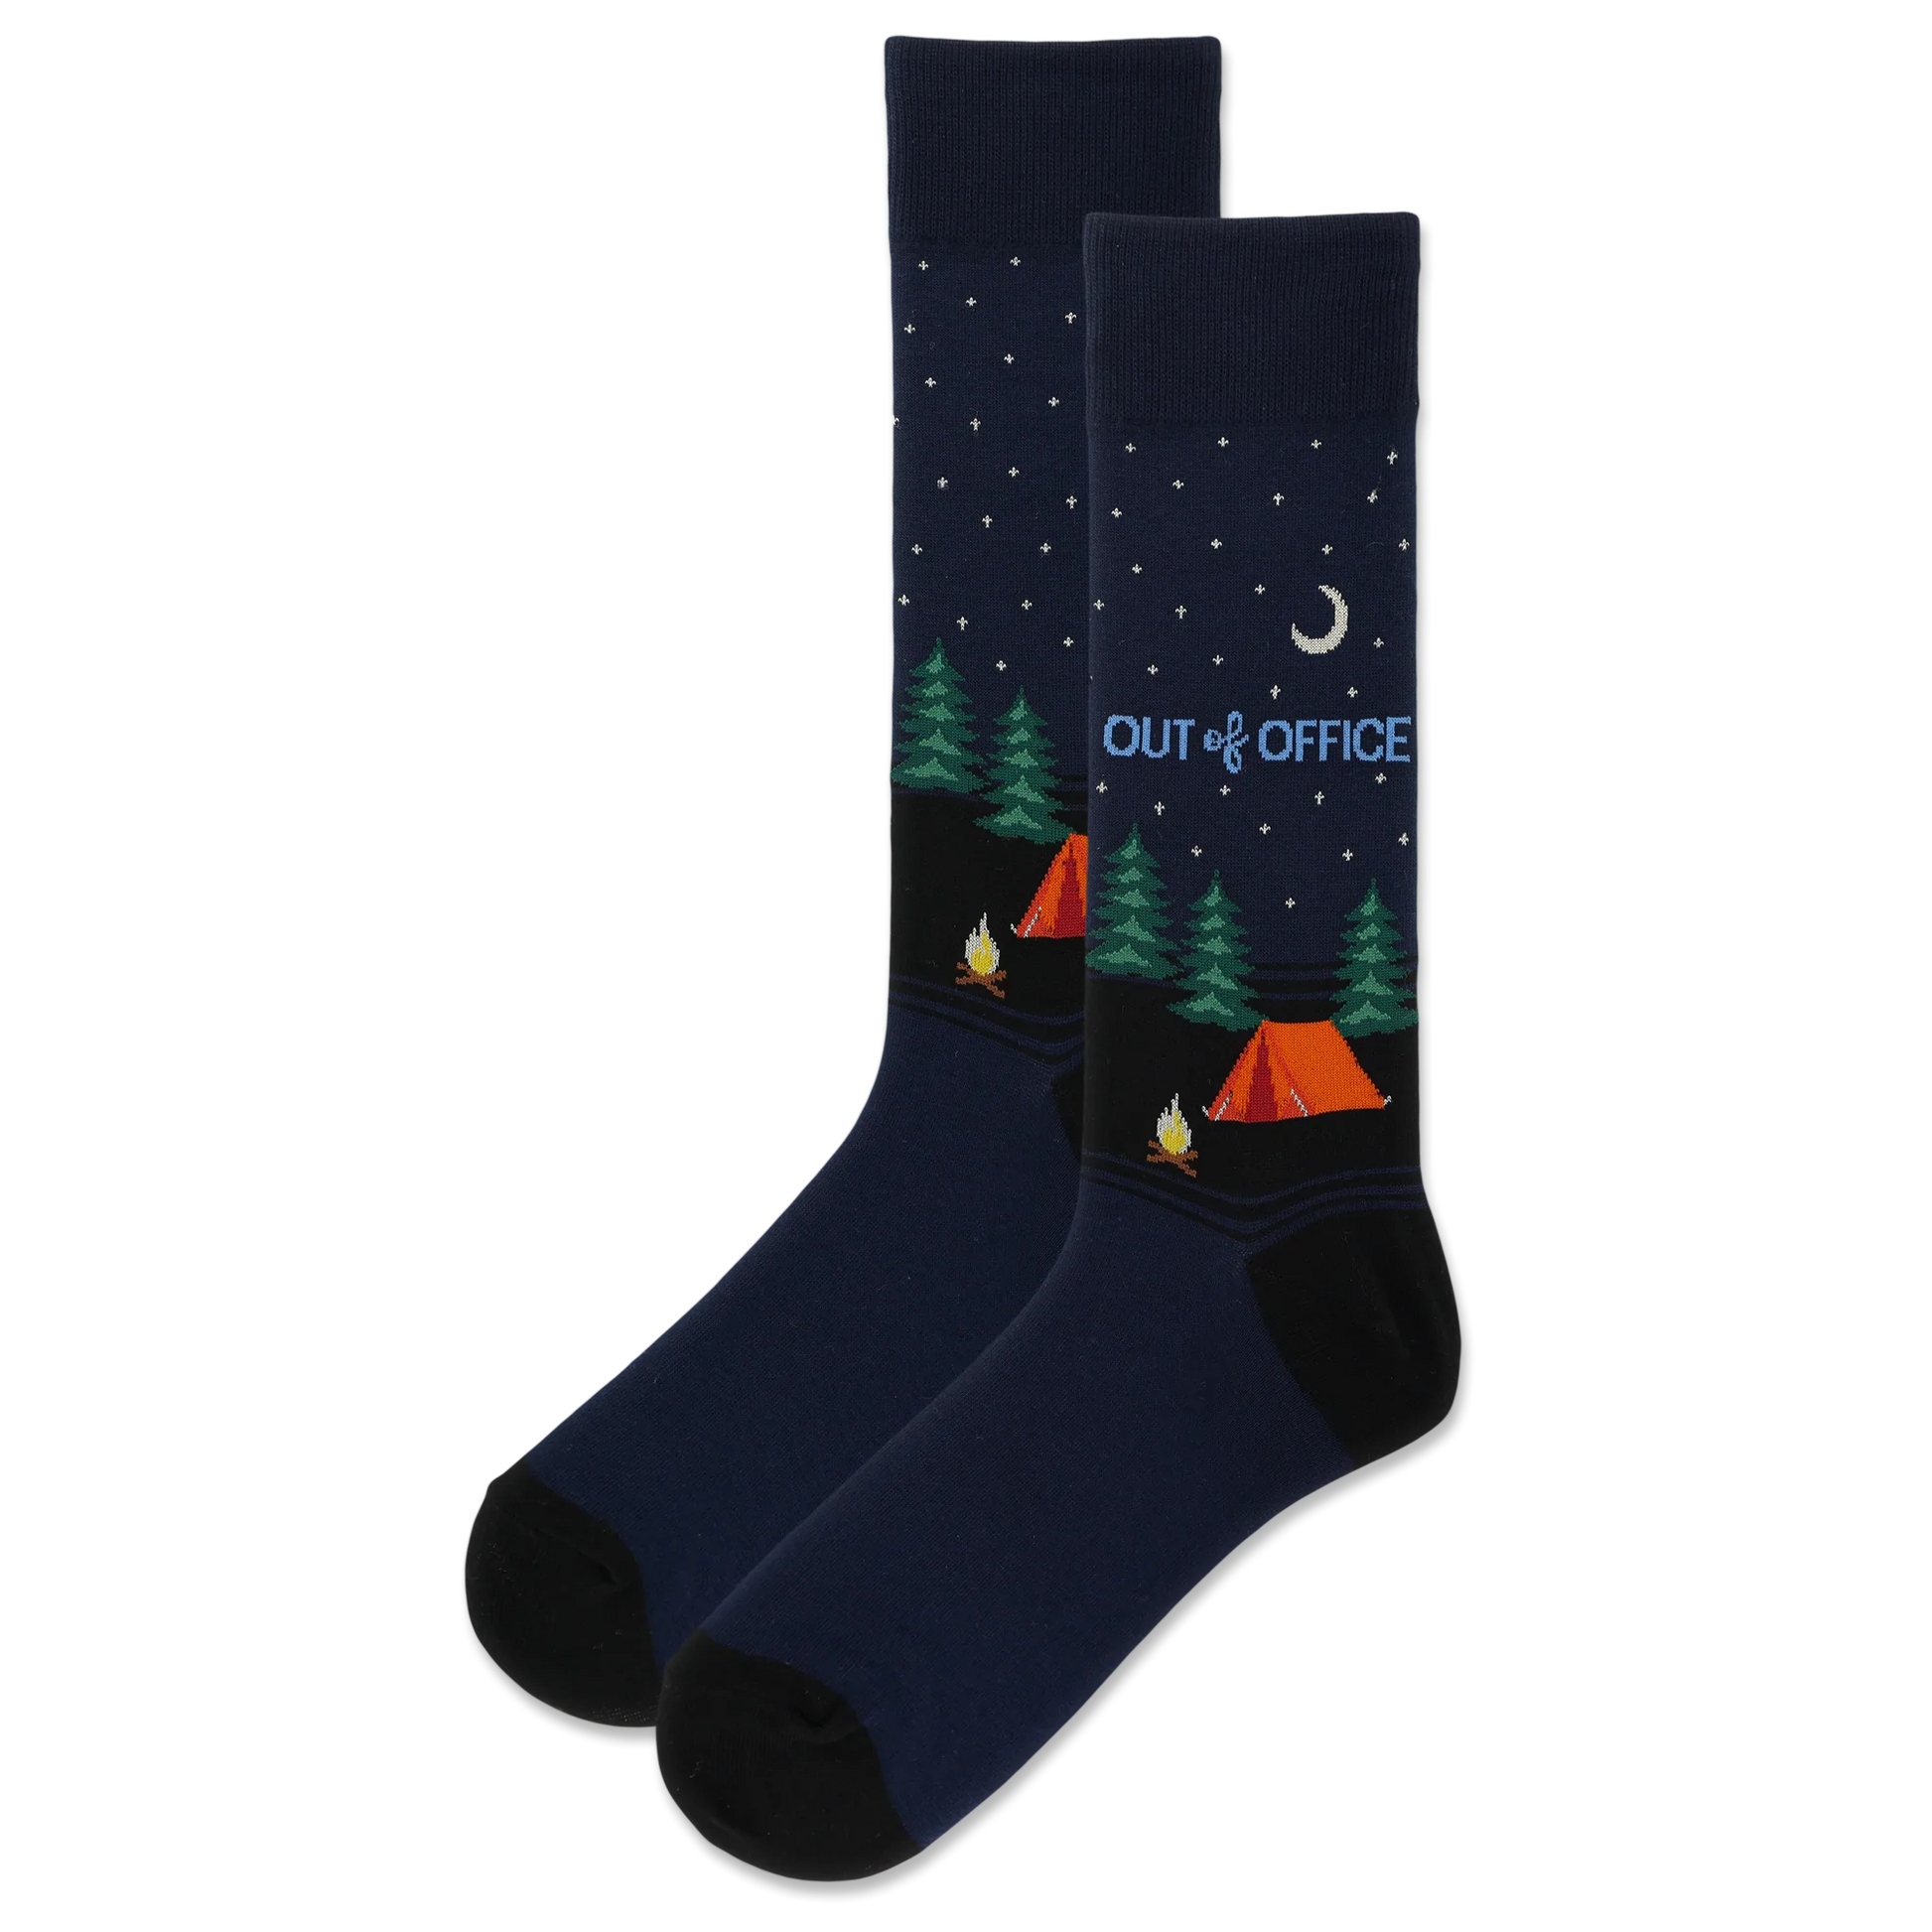 HOTSOX Men's "Out of Office" Crew Socks